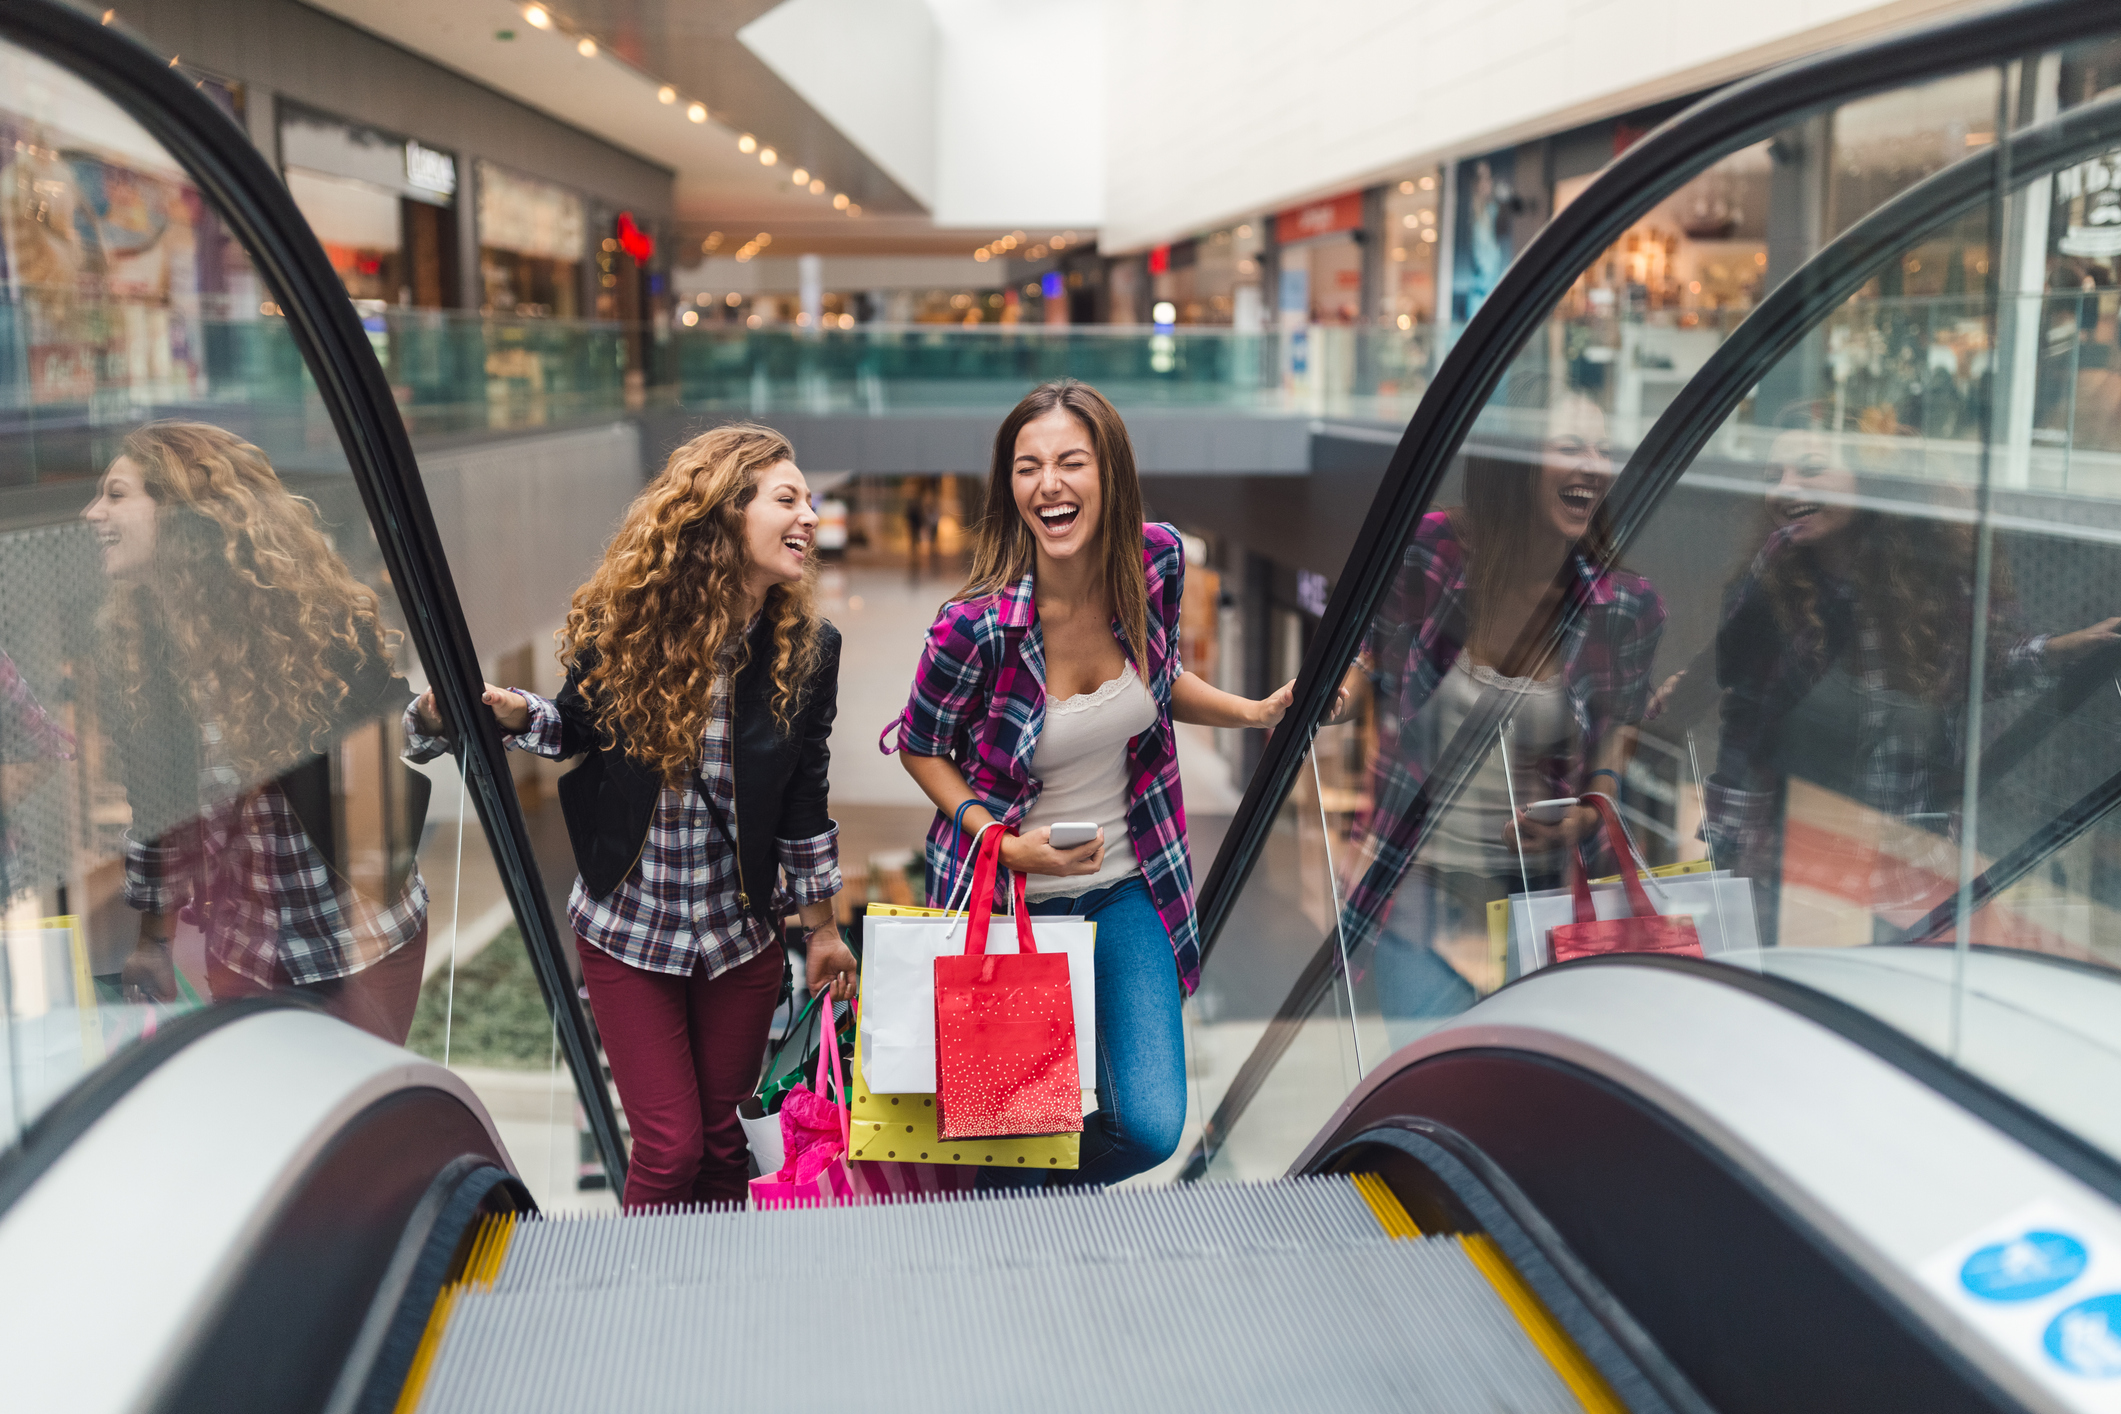 U.S. consumers make upwards of 90 billion visits to businesses every year. During these visits, a staggering 79 percent notice the music that's being played. For this reason, many successful retailers use music to connect with their customers.